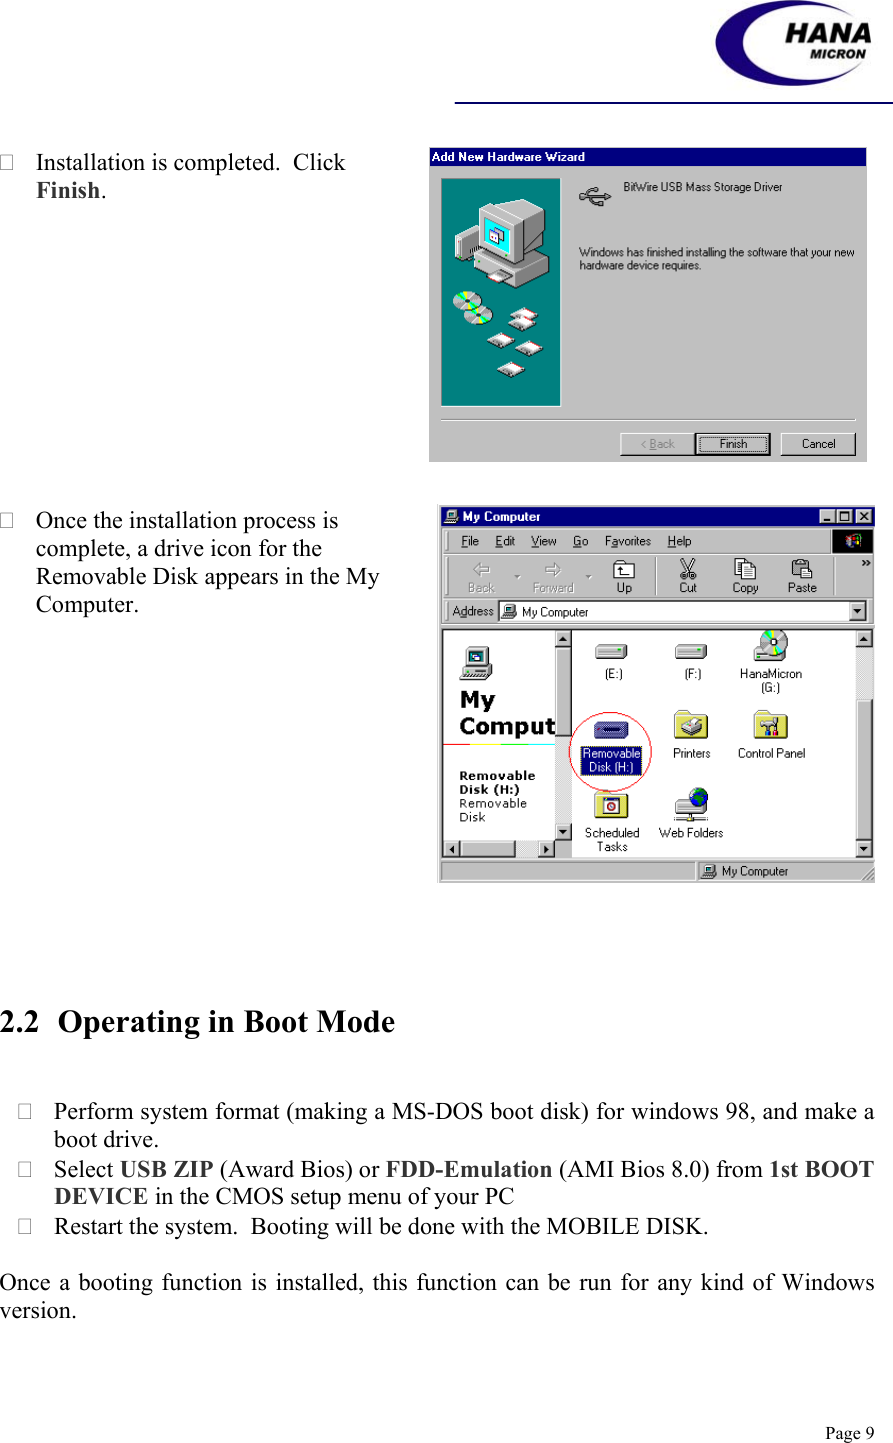    Page 9  Installation is completed.  Click Finish.   Once the installation process is complete, a drive icon for the Removable Disk appears in the My Computer.     2.2 Operating in Boot Mode    Perform system format (making a MS-DOS boot disk) for windows 98, and make a boot drive.  Select USB ZIP (Award Bios) or FDD-Emulation (AMI Bios 8.0) from 1st BOOT DEVICE in the CMOS setup menu of your PC  Restart the system.  Booting will be done with the MOBILE DISK.  Once a booting function is installed, this function can be run for any kind of Windows version.  